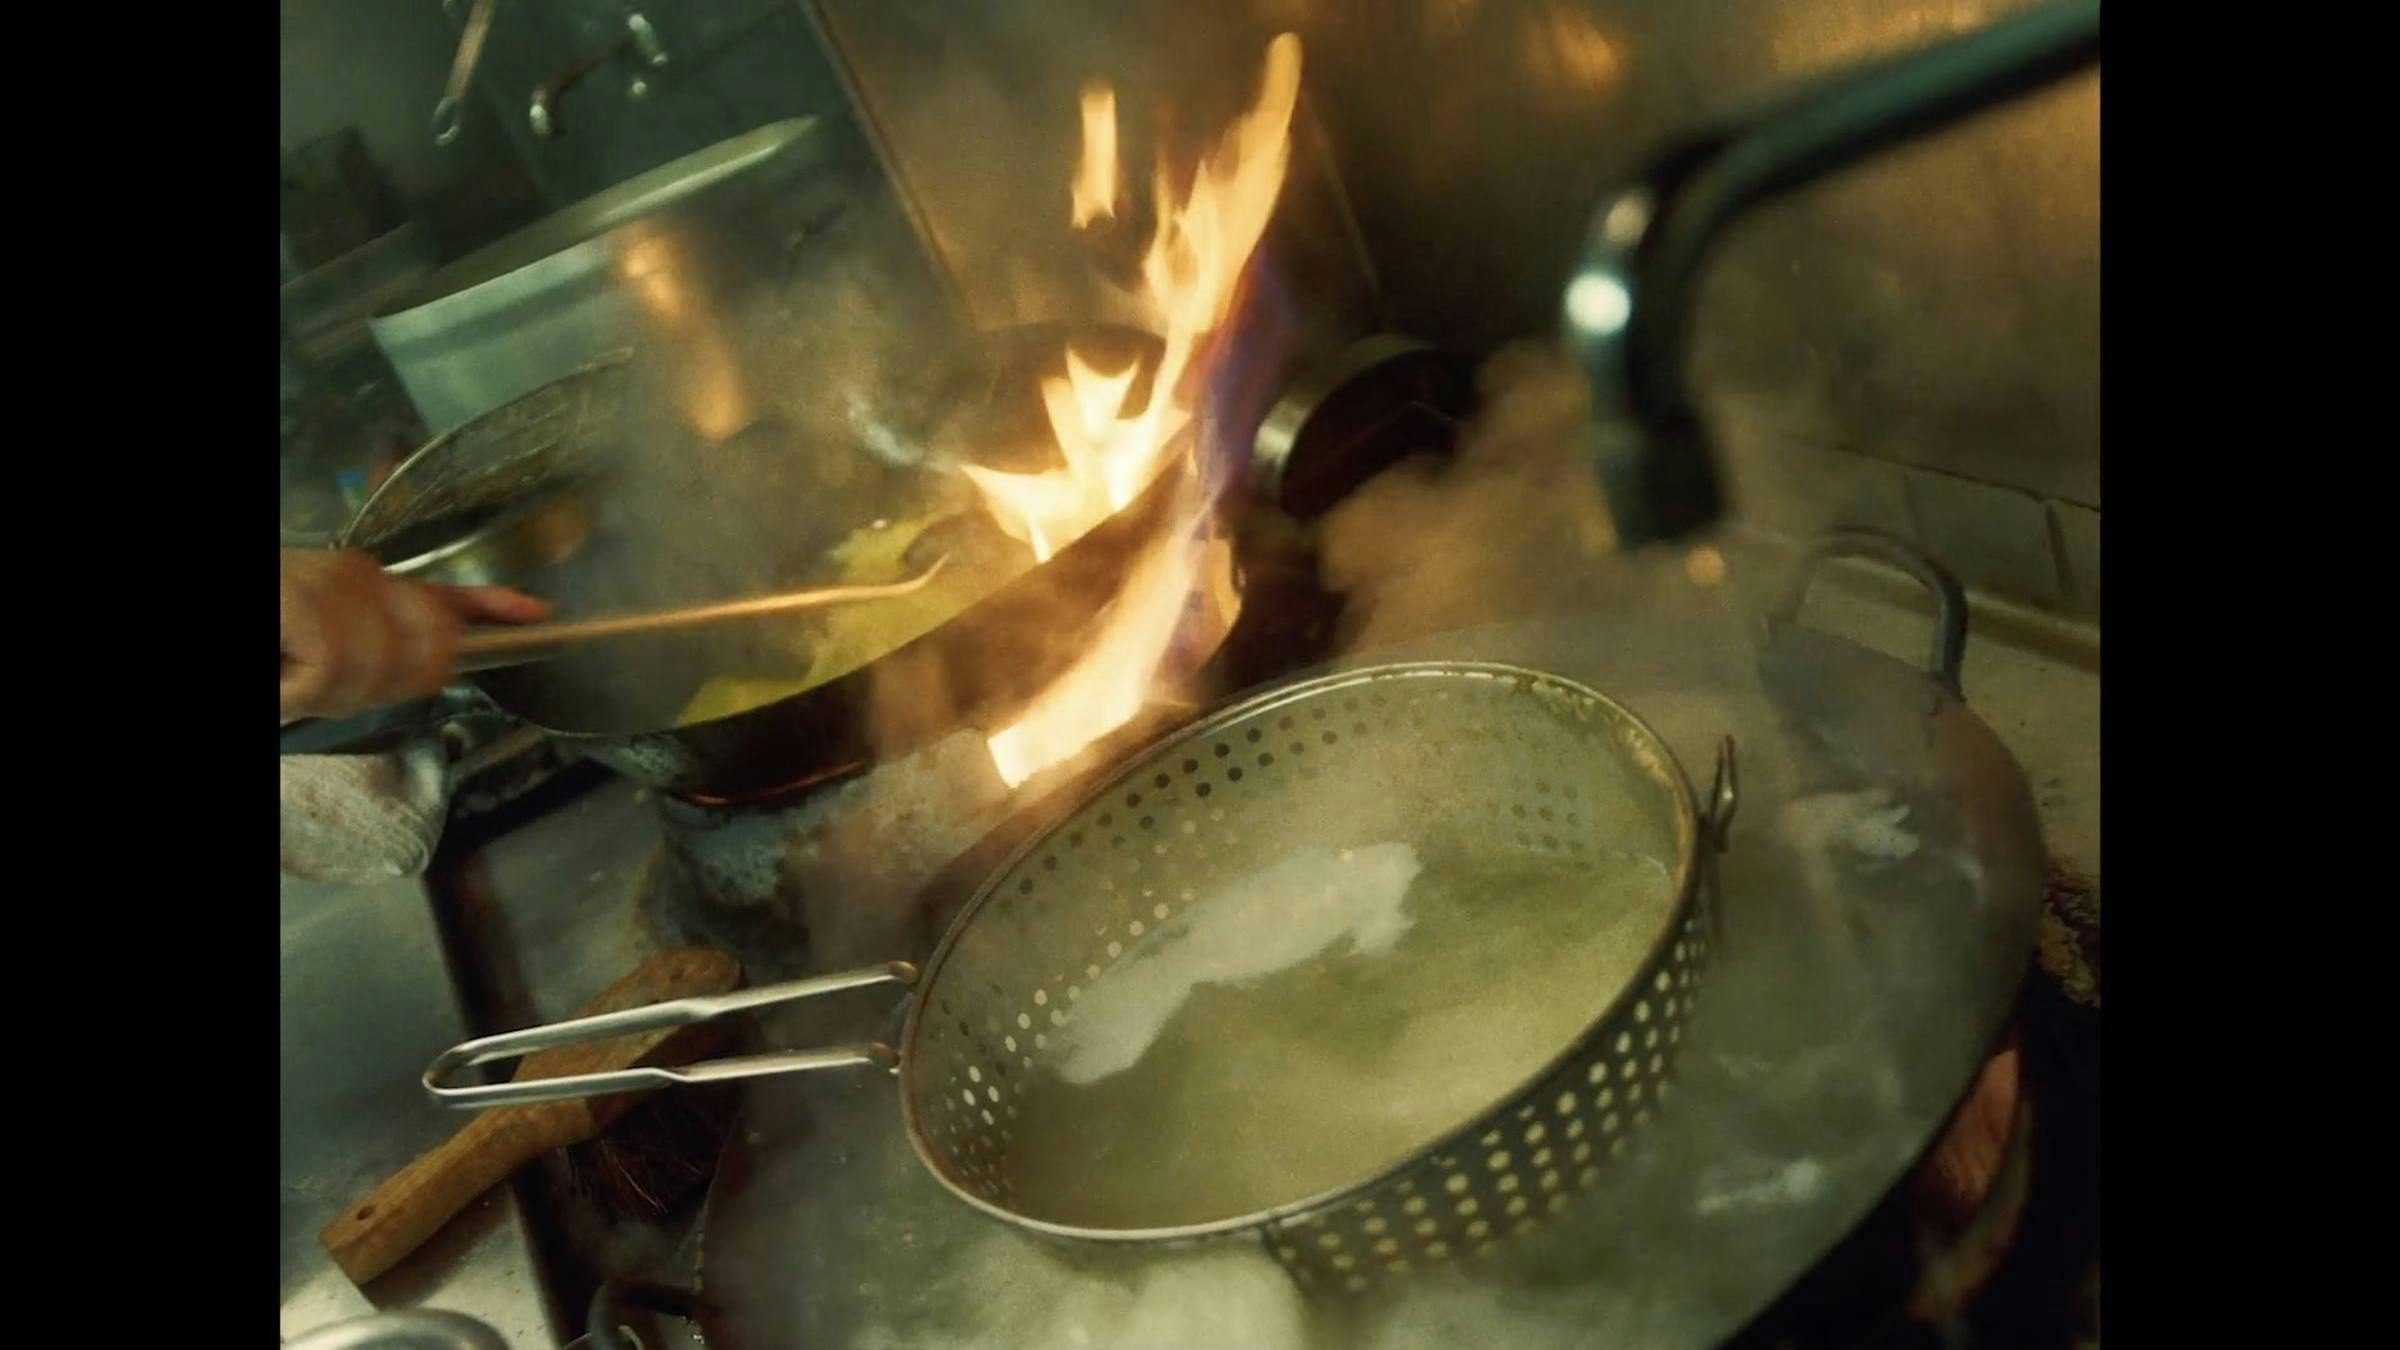 a busy resturant kitchen scene. We can see a pan on fire and a colander being submerged in a sink 